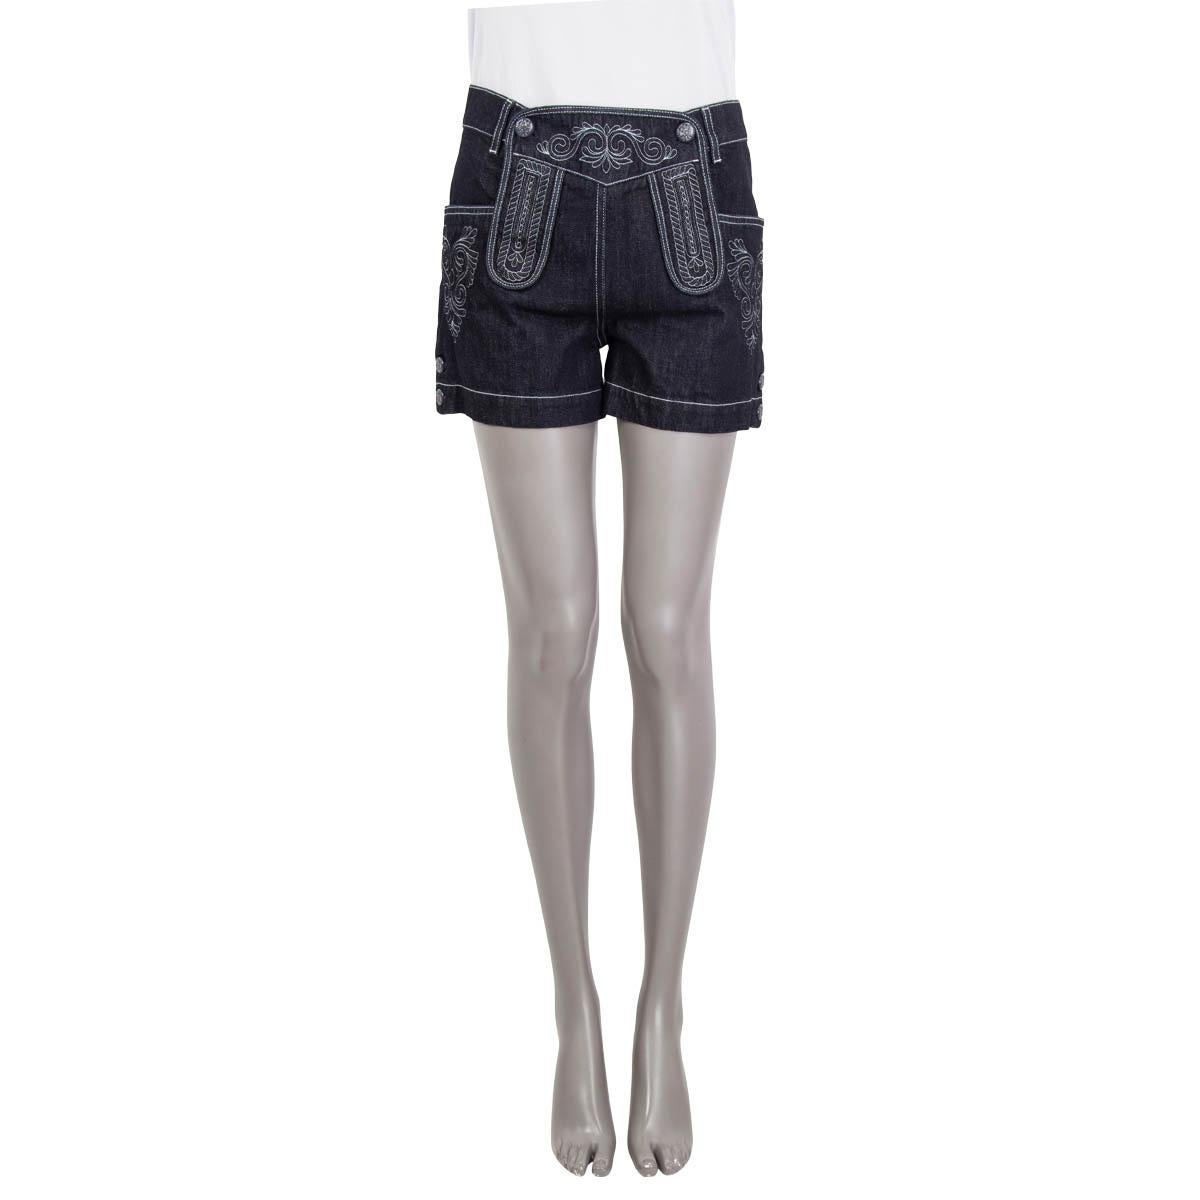 100% authentic Chanel 2015 Salzburg embroidered denim shorts in midnight blue cotton (100%). Feature belt loops and two slit pockets on the front. Open with four buttons on the front. Unlined. Has been worn and is in excellent